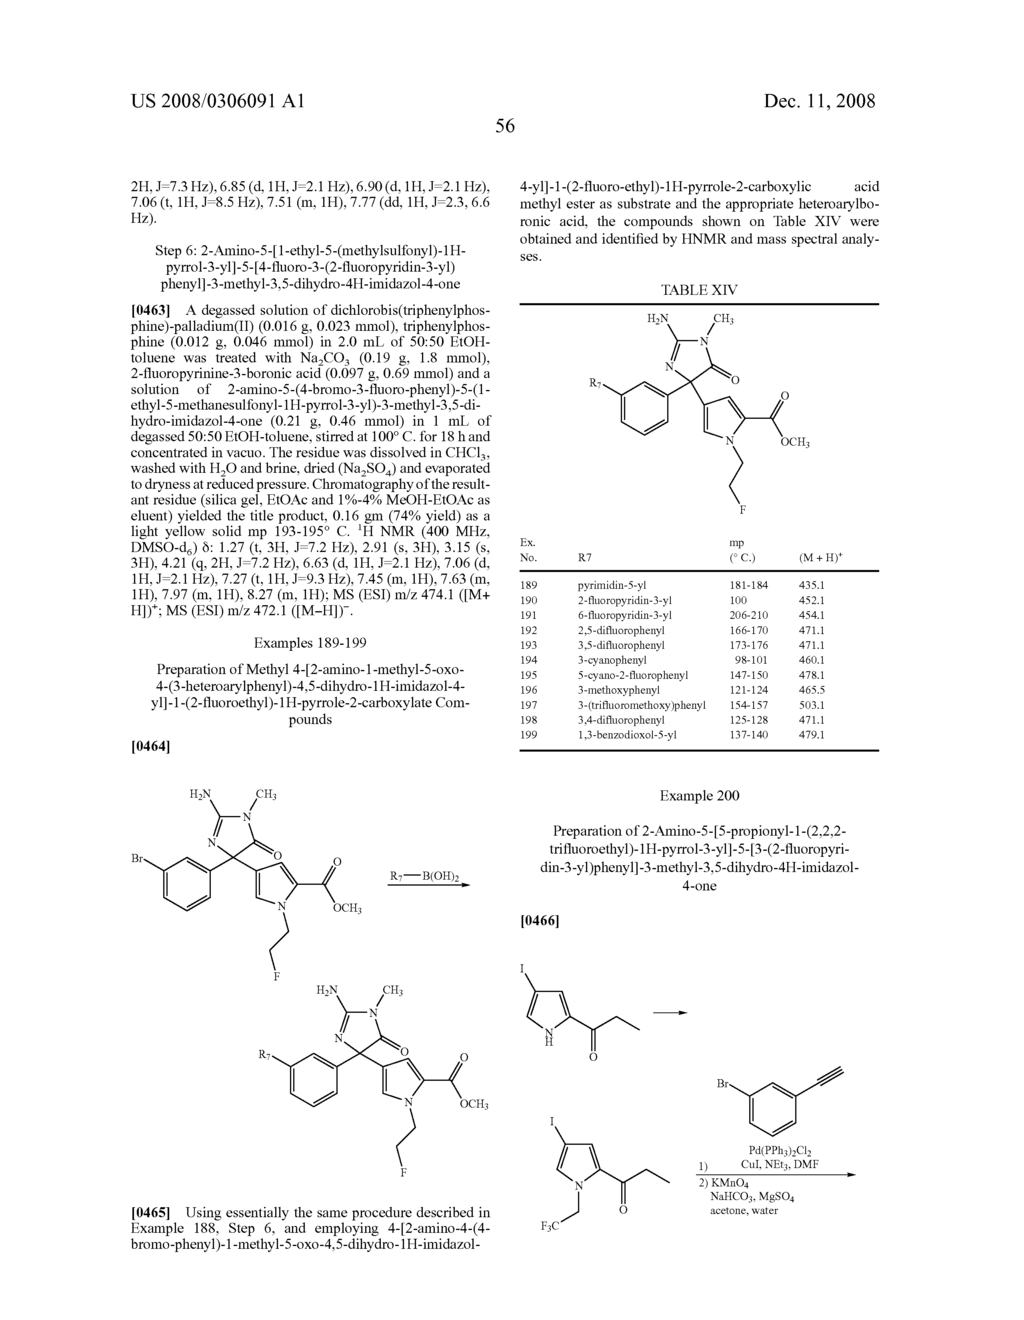 AMINO-5-(5-MEMBERED)HETERO-ARYLIMIDAZOLONE COMPOUNDS AND THE USE THEREOF FOR beta-SECRETASE MODULATION - diagram, schematic, and image 57